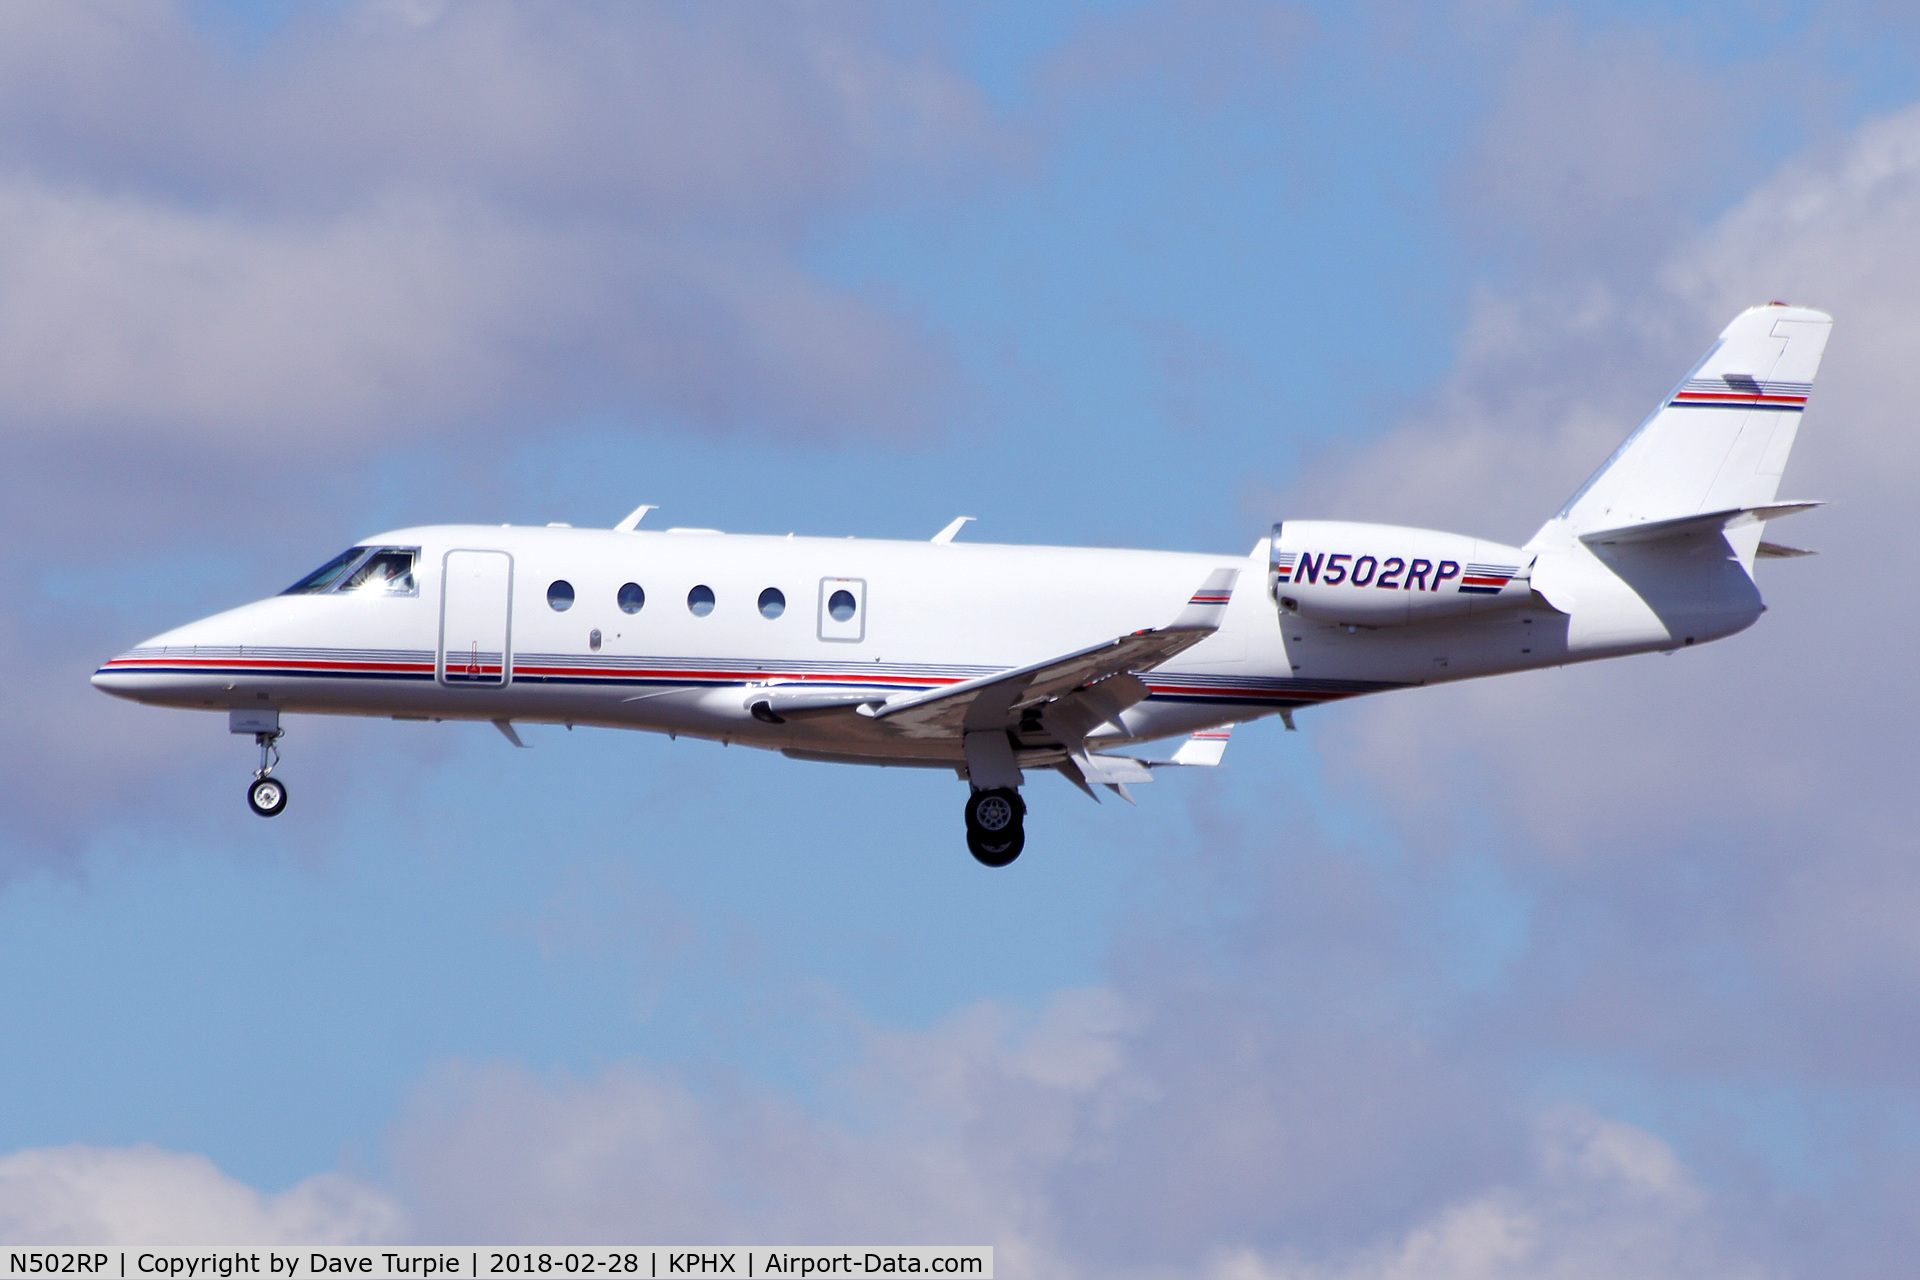 N502RP, 2006 Israel Aircraft Industries Gulfstream G150 C/N 212, No comment.